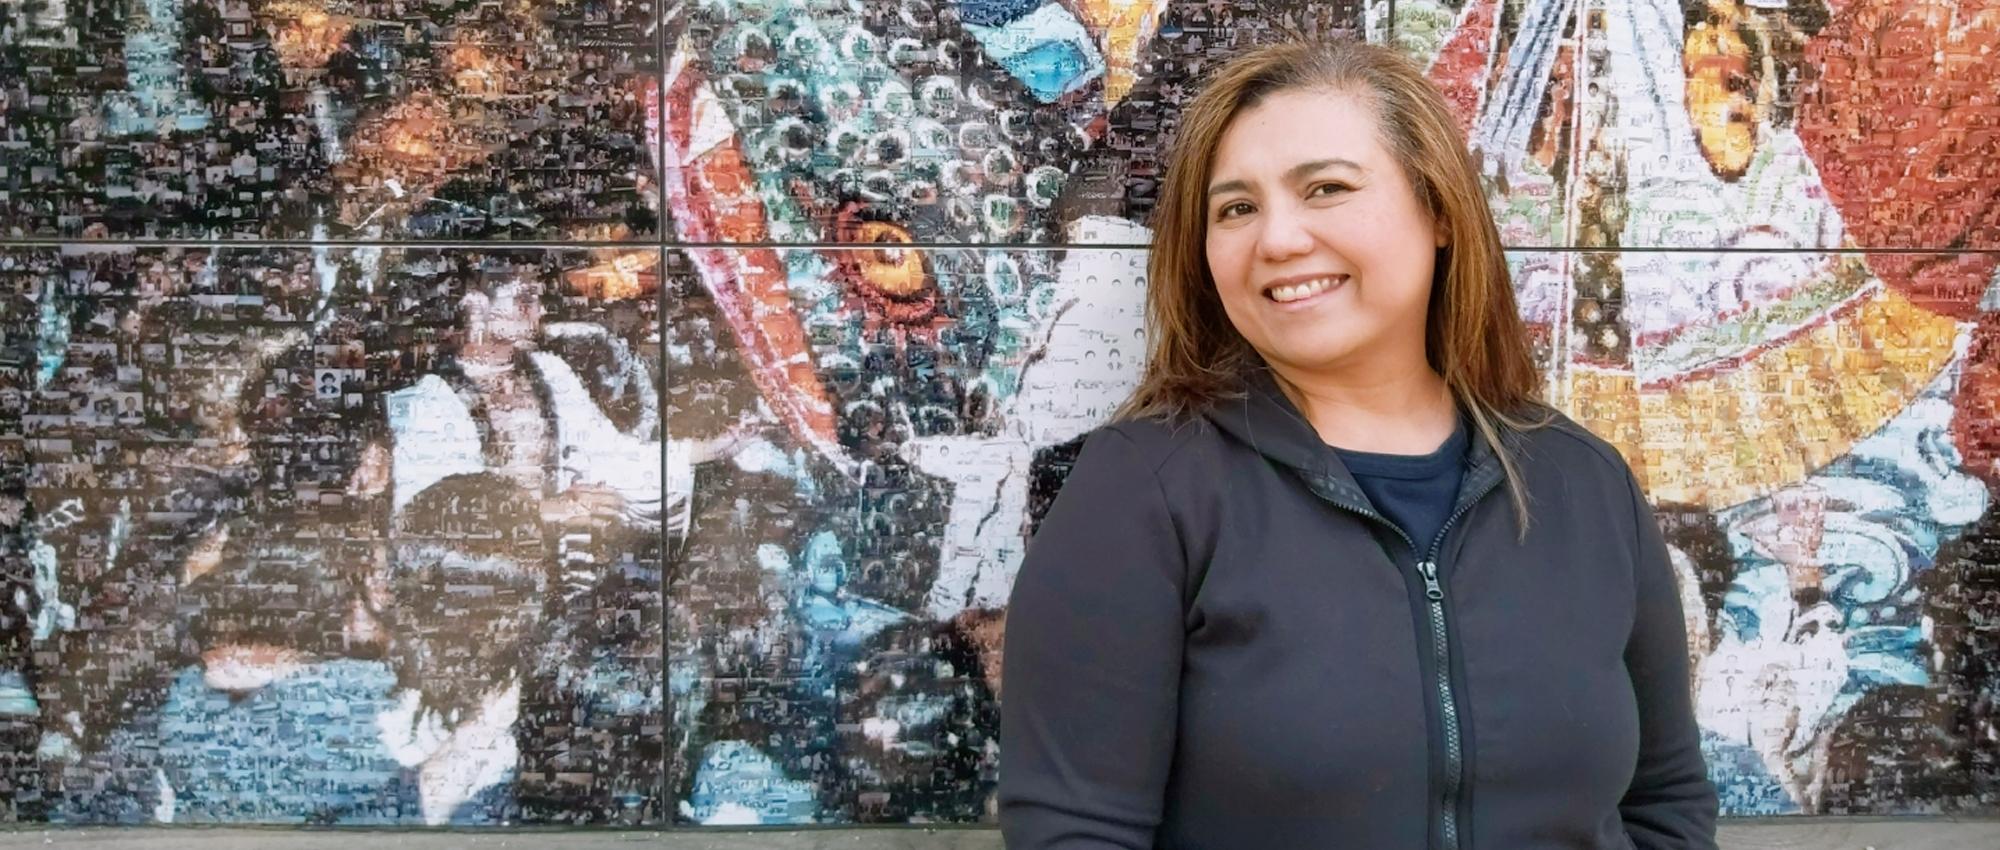 Lilet Raffiñan, a Canadian of Asian heritage who recruits donors for Canadian Blood Services, stands in front of a colourful mural.